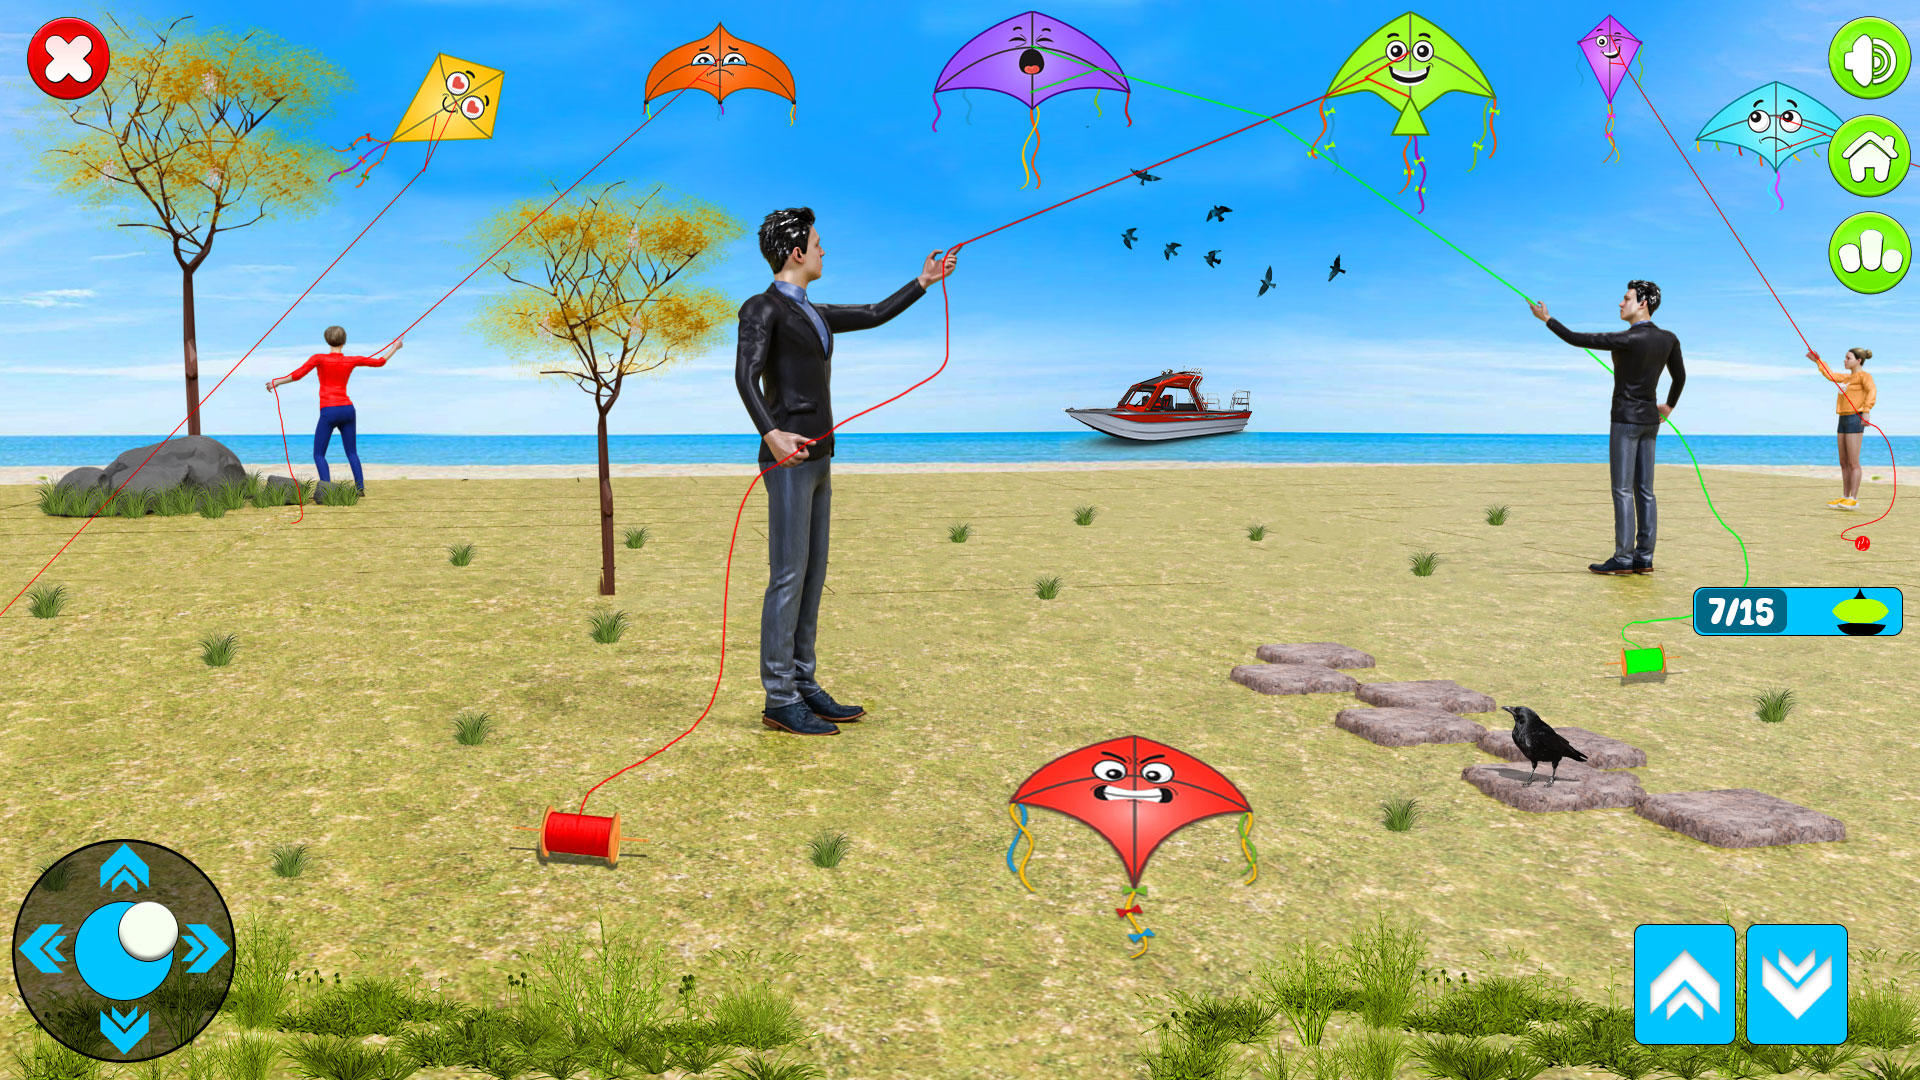 Kite game 3D - Kite Fight game android iOS apk download for free